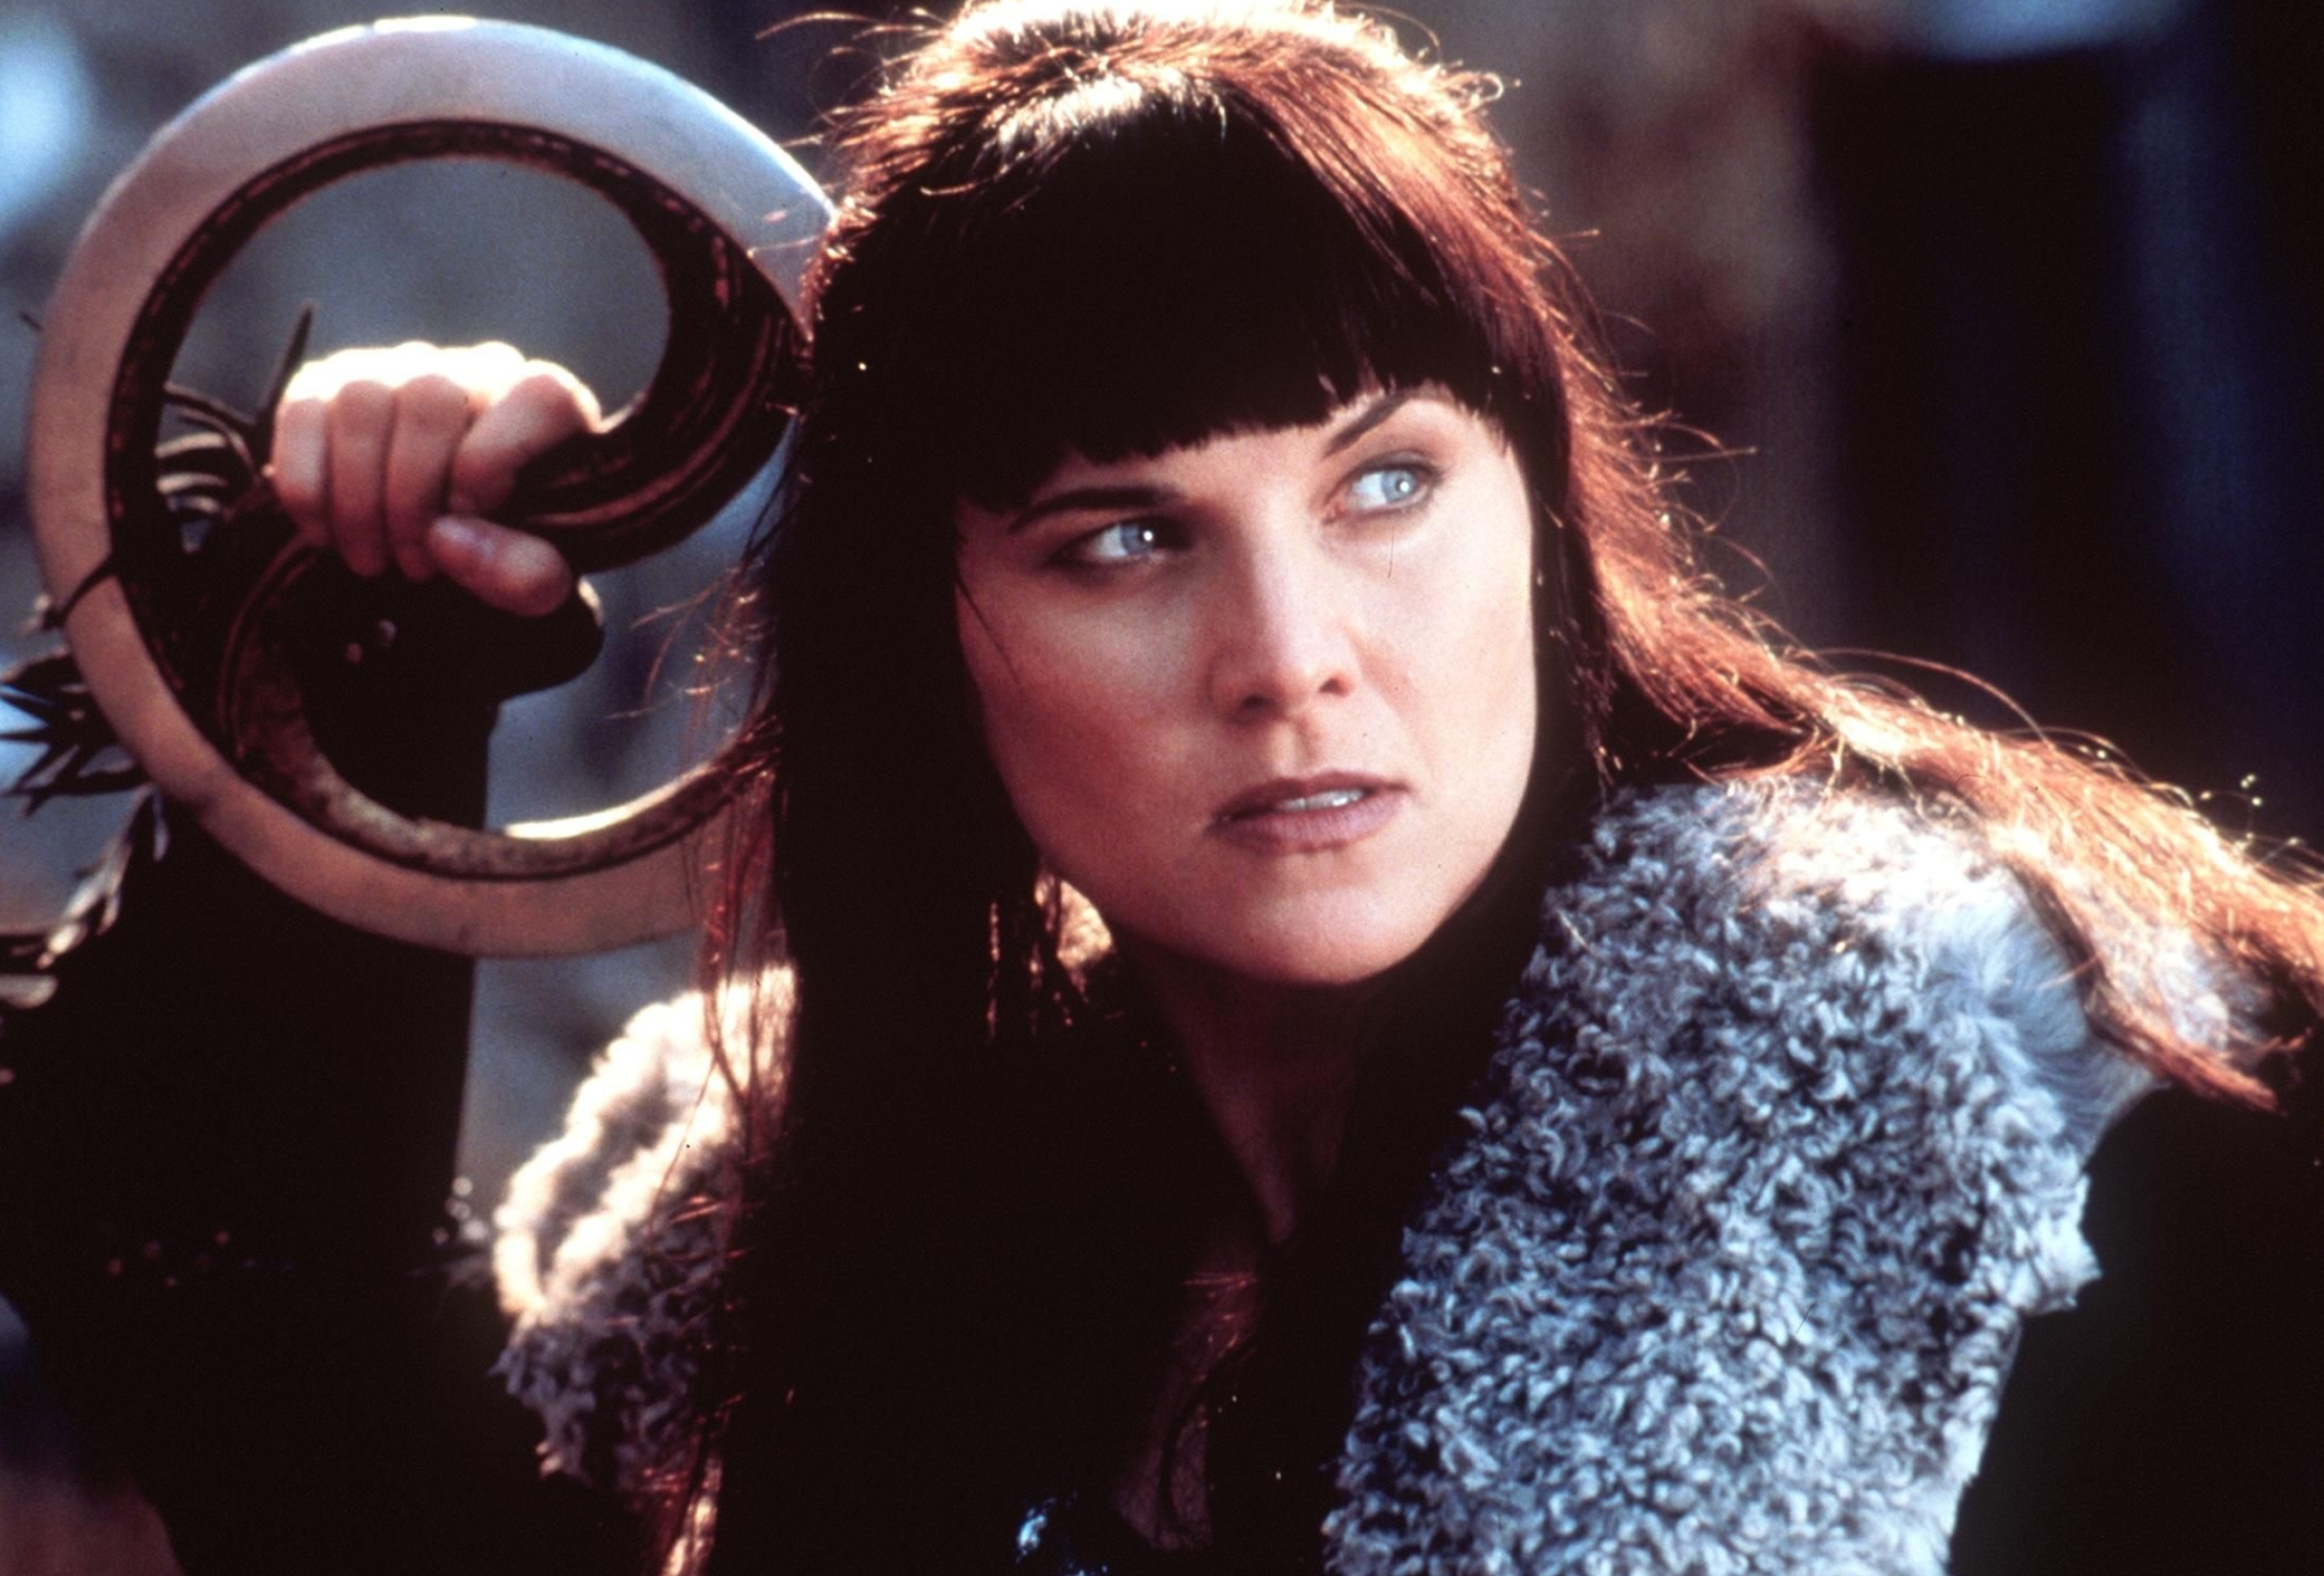 Lucy Lawless: Xena: Warrior Princess, An American fantasy television series, The strong female protagonist. 2440x1650 HD Wallpaper.